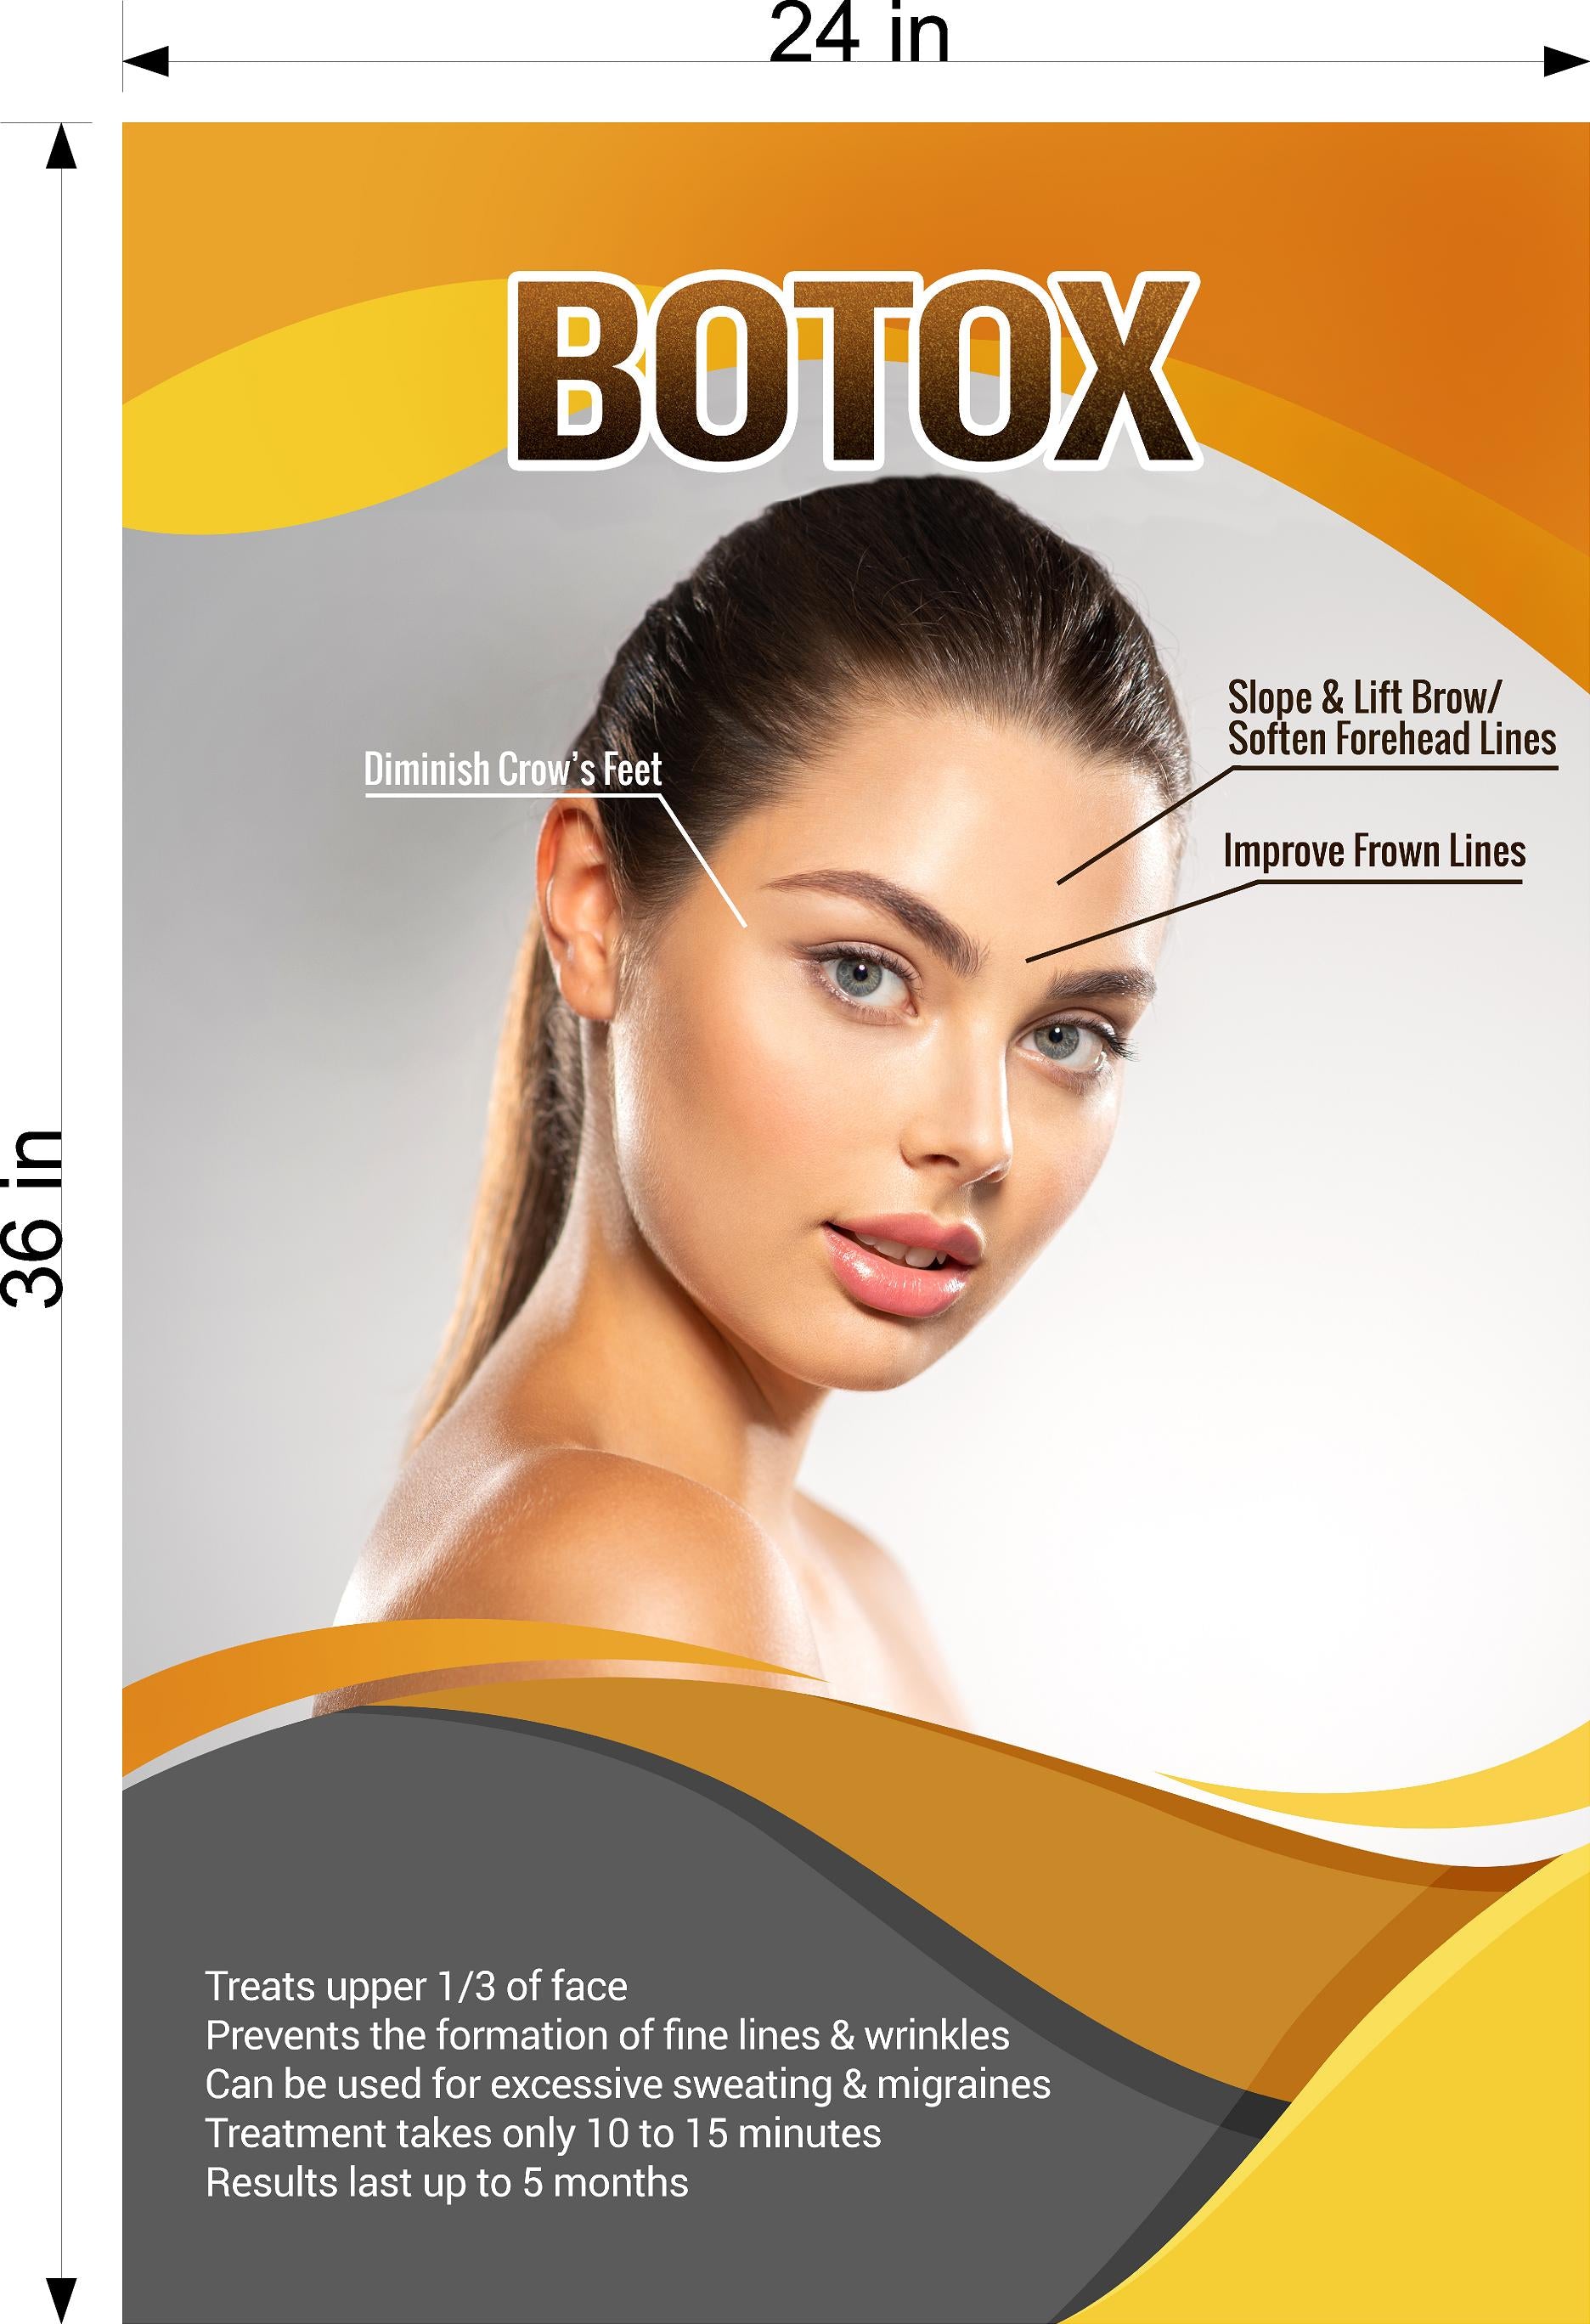 Botox 18 Perforated Mesh One Way Vision See-Through Window Vinyl Poster Sign Vertical